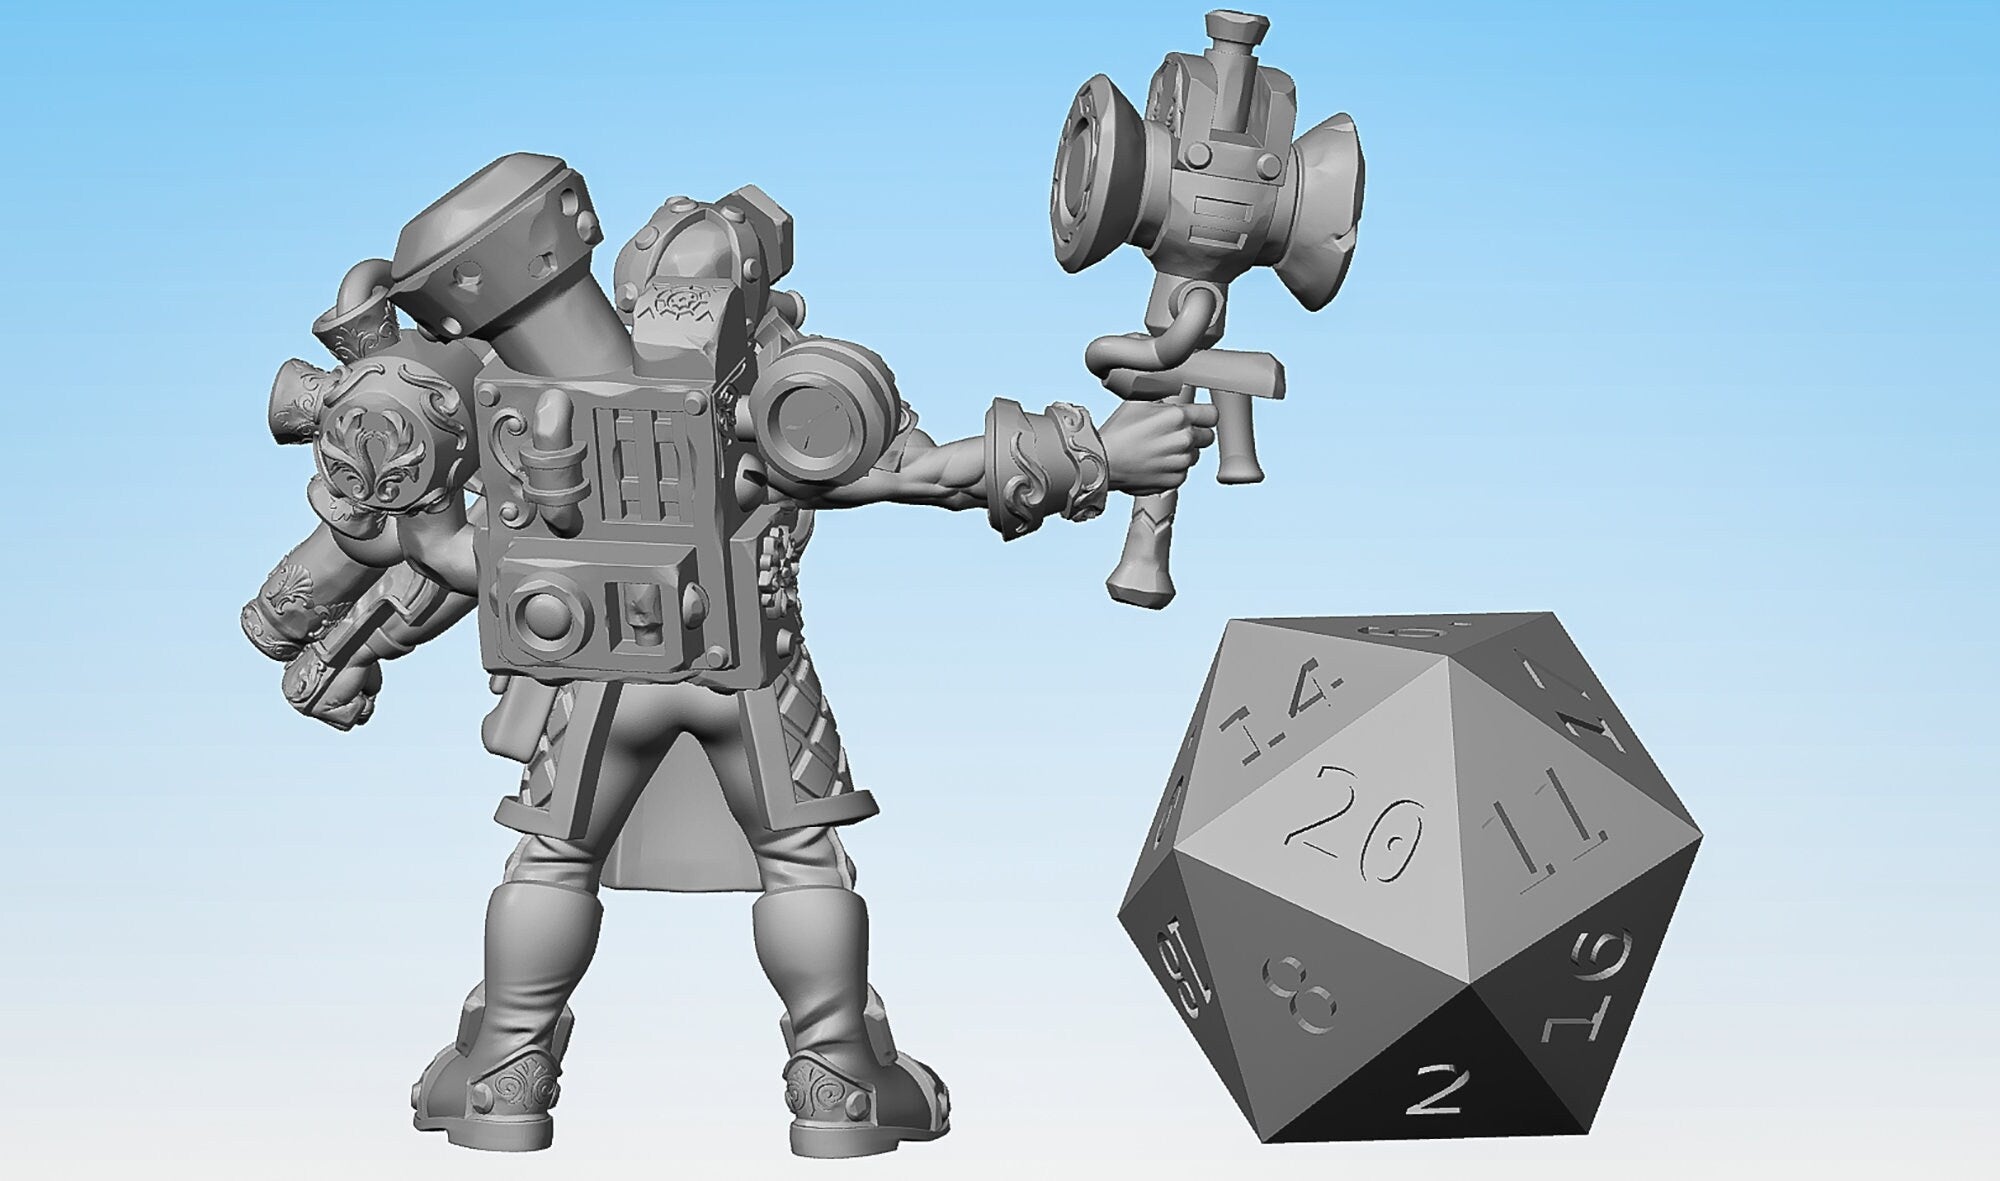 ARTIFICER "The Mechanic" | Dungeons and Dragons | | DnD | Pathfinder | Tabletop | RPG | Hero Size | 28 mm-Role Playing Miniatures